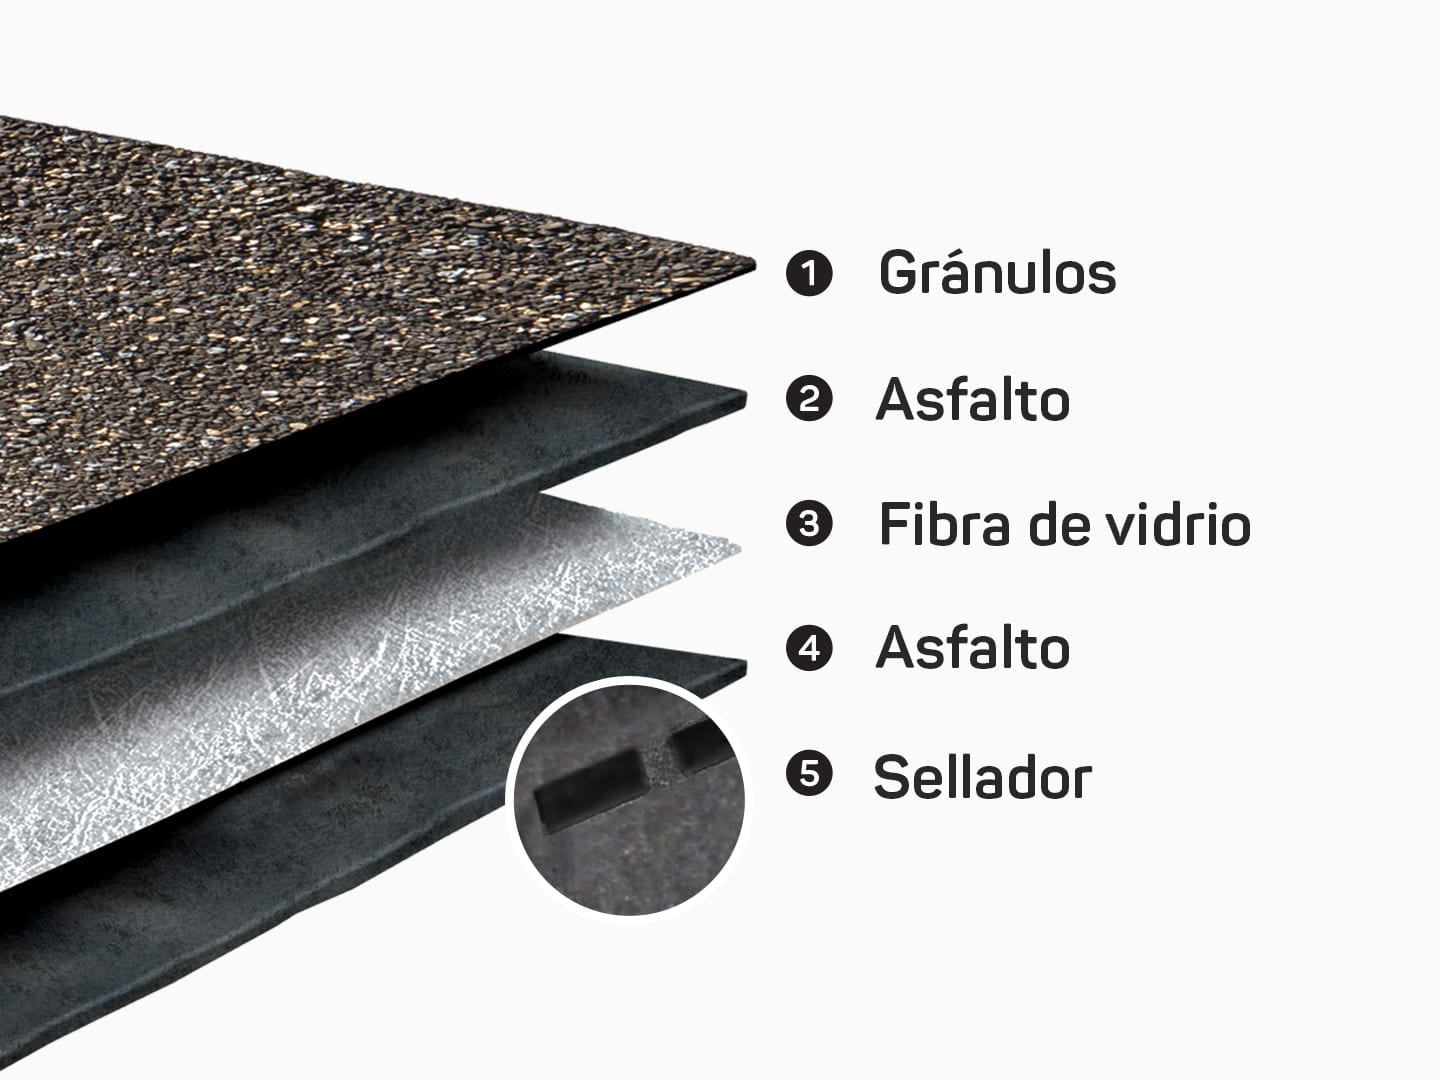 graphic showing component layers of a shingle